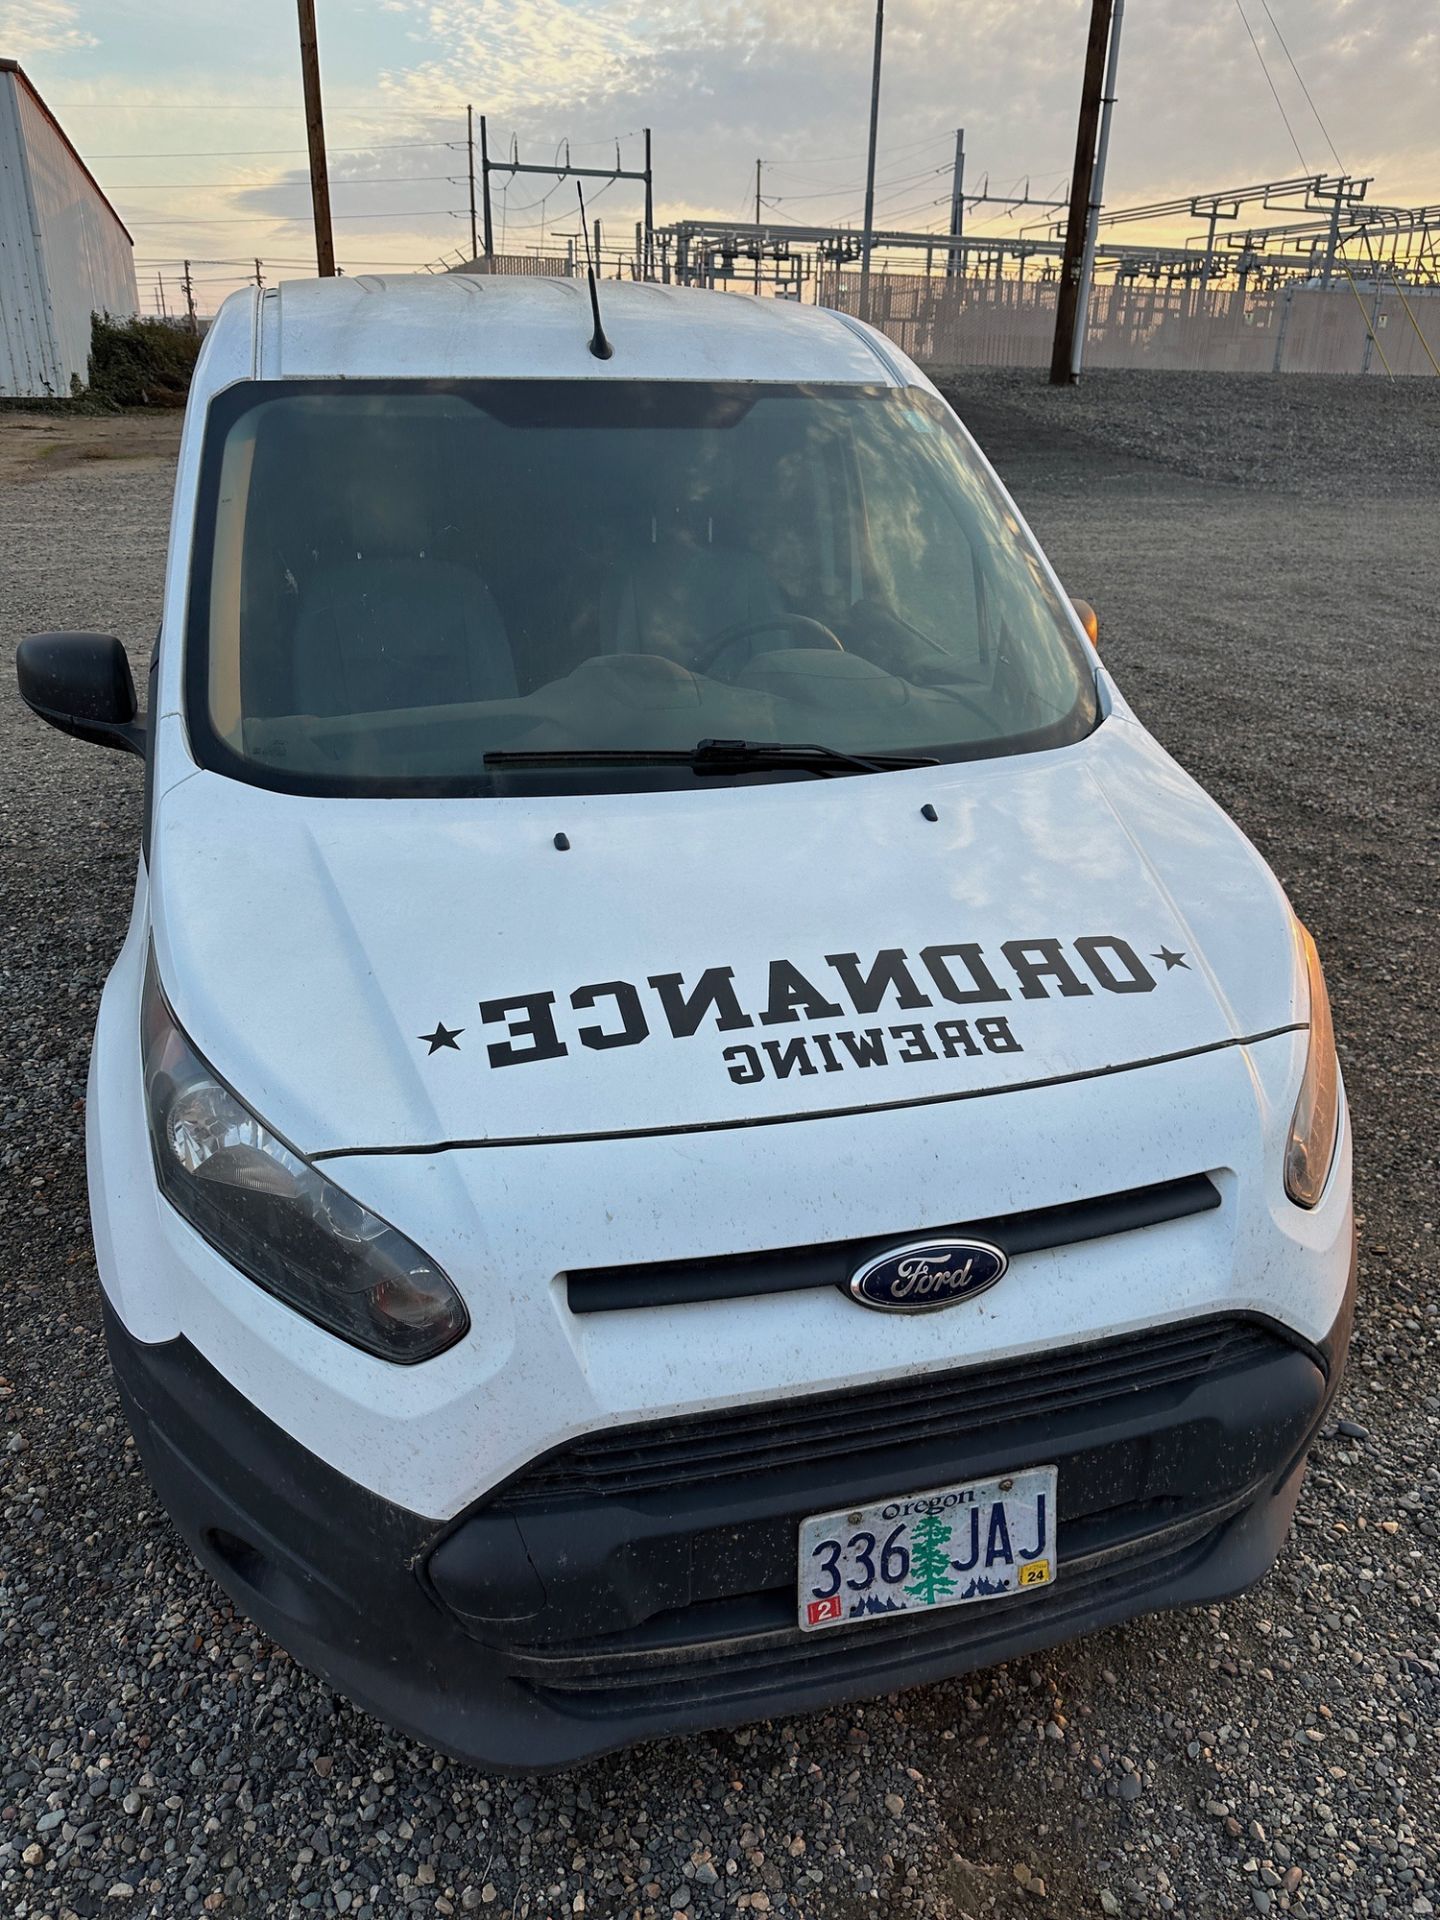 2016 Ford Transit Connect Delivery Van, Current Miles: 107,849, VIN: NM0LS7E72G1236687 | Rig Fee $75 - Image 5 of 6